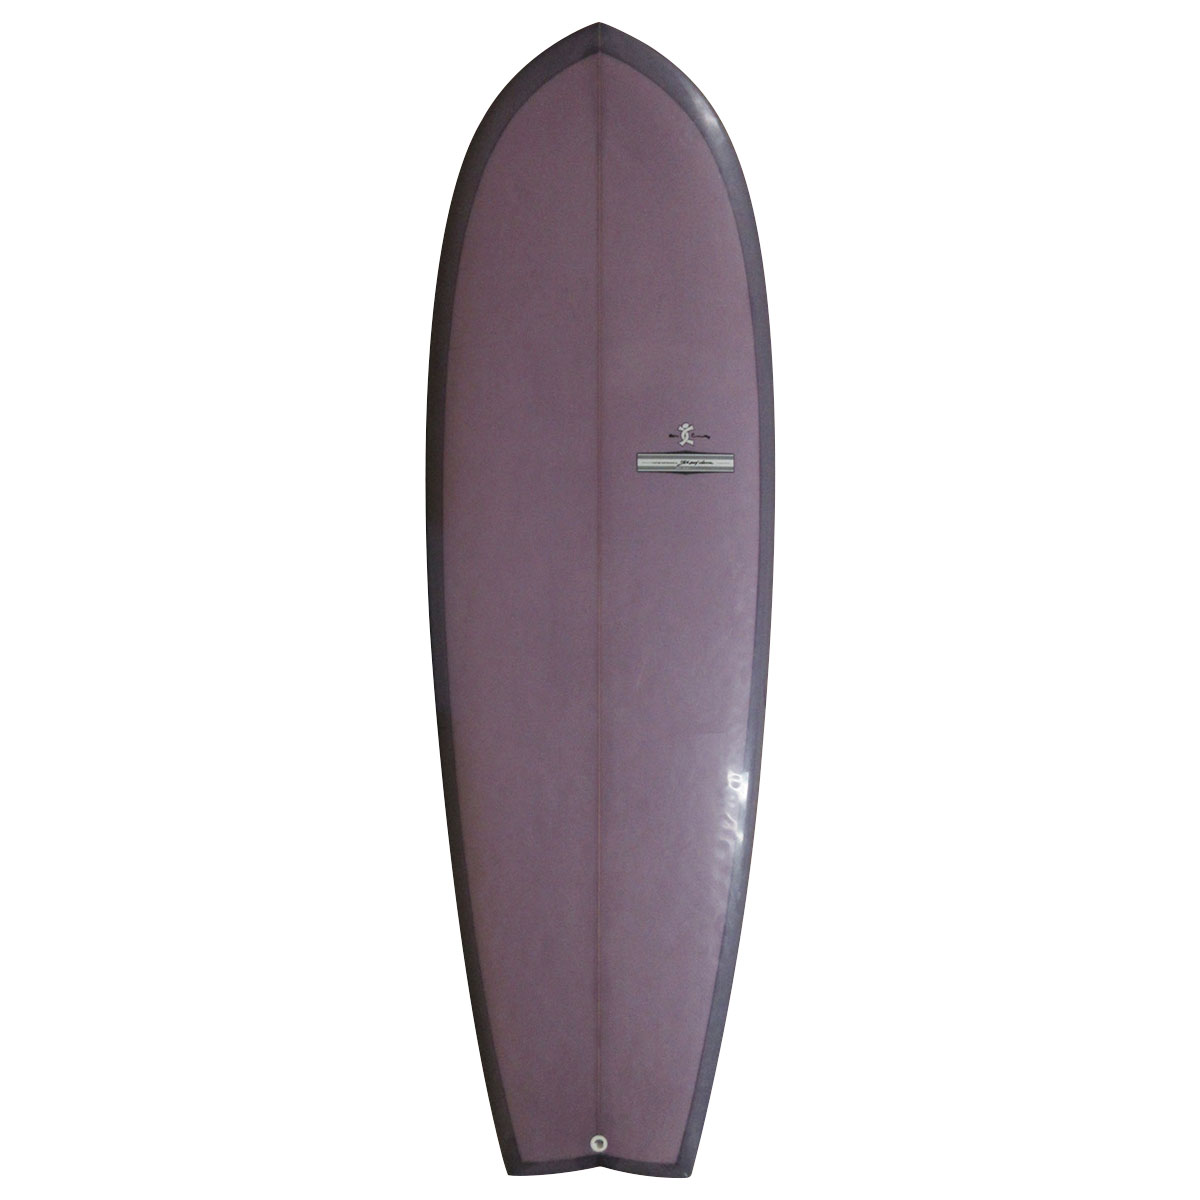 YU SURF CLASSIC / MAGIC SHARK 5`10 Shaped by KEVIN CONNELLY